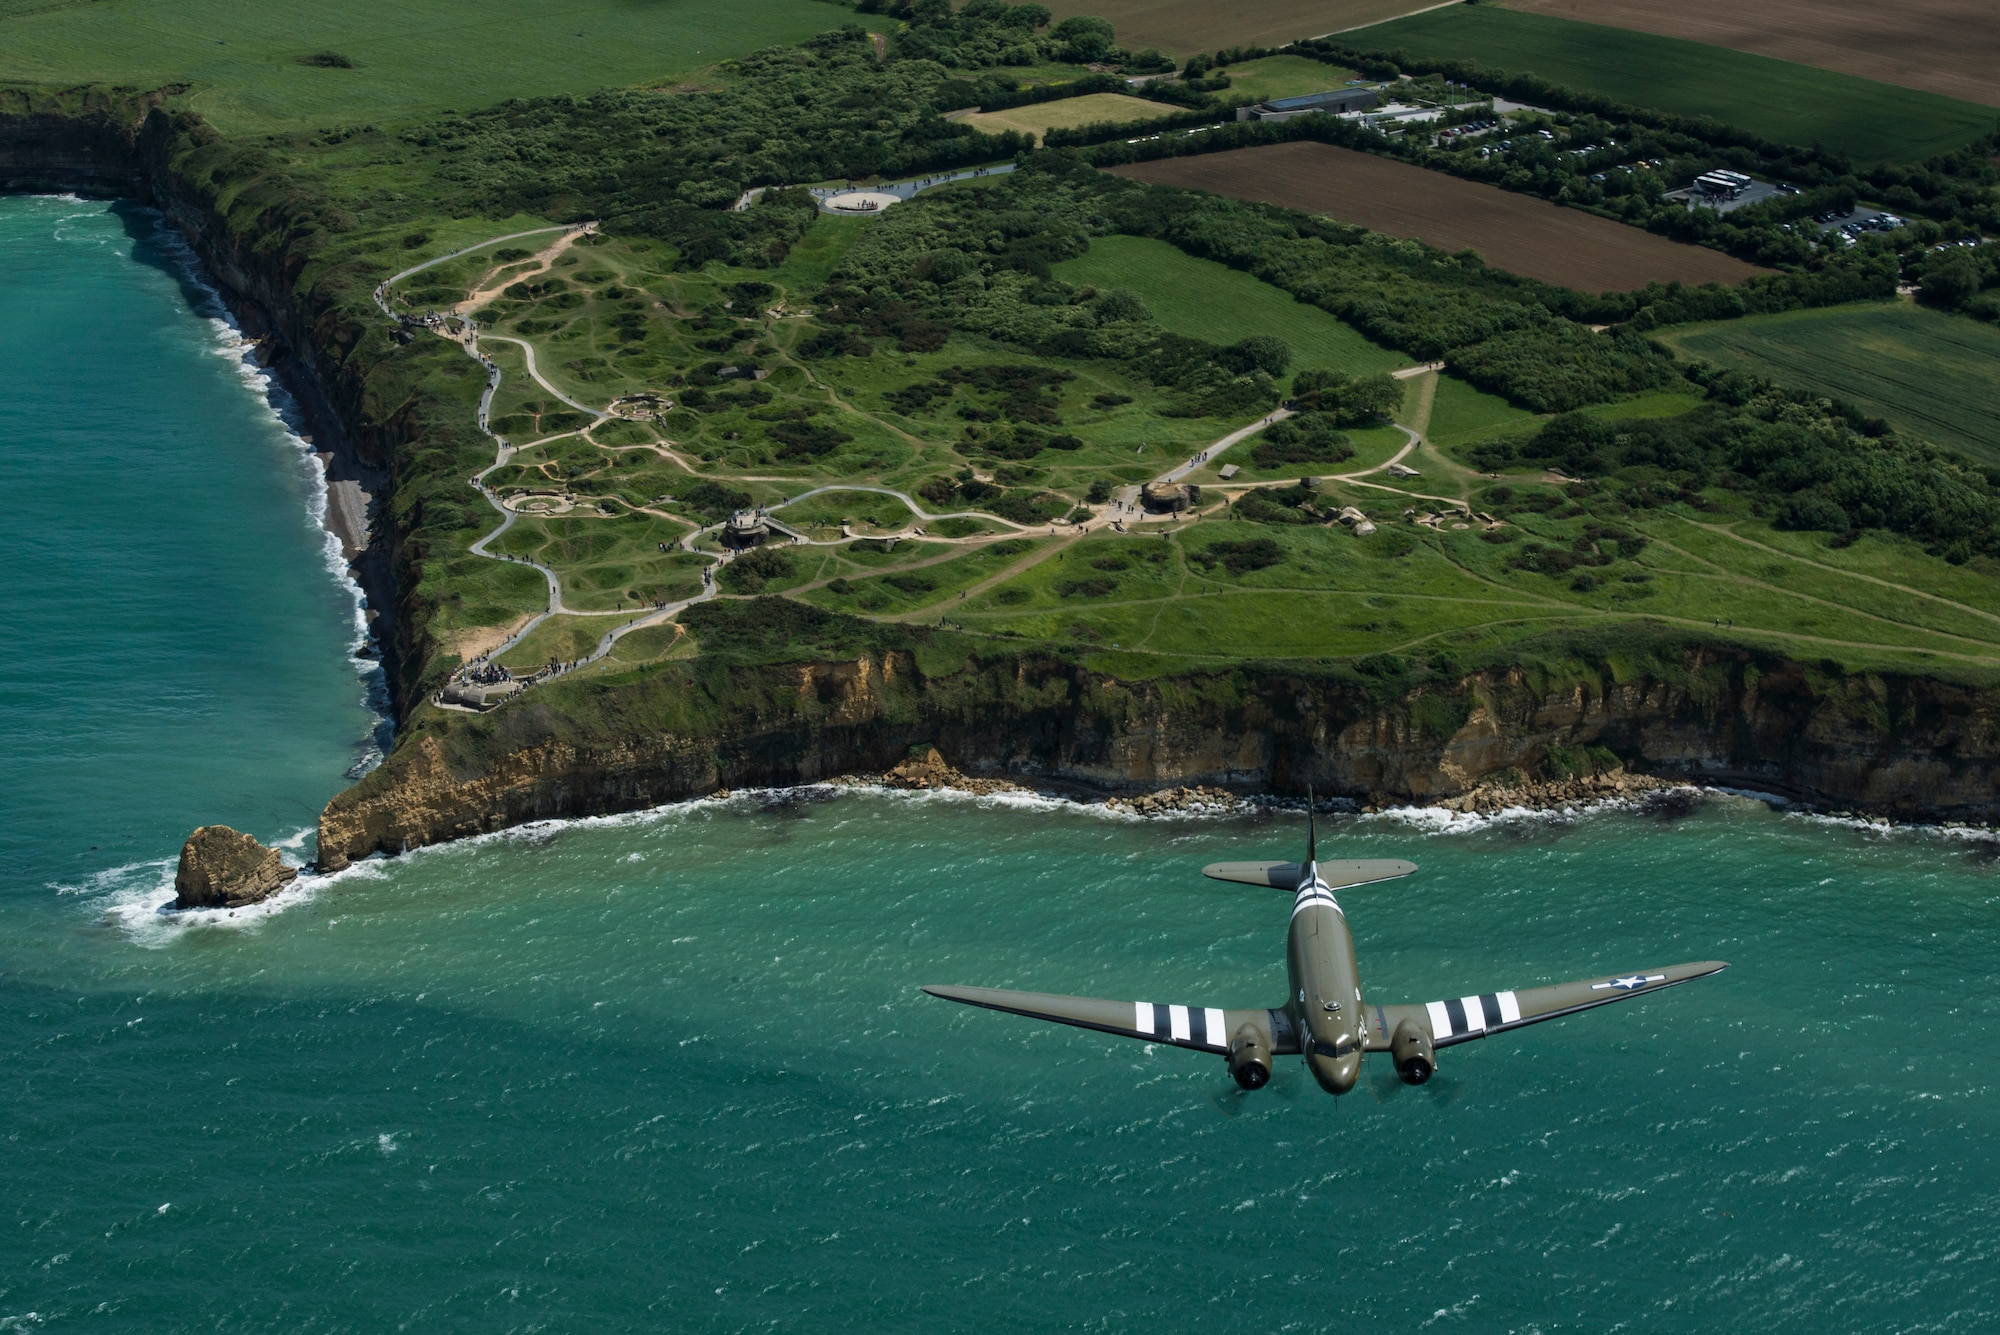 A Douglas C-47 Dakota, nicknamed “That’s All Brother”, flies with a U.S. Air Force C-130J Super Hercules, assigned to the 37th Airlift Squadron, Ramstein Air Base, Germany, over Pointe-du-Hoc, France, June 8, 2019. “That’s All Brother” flew operations during the invasion of Normandy. (U.S. Air Force photo by Senior Airman Devin M. Rumbaugh)